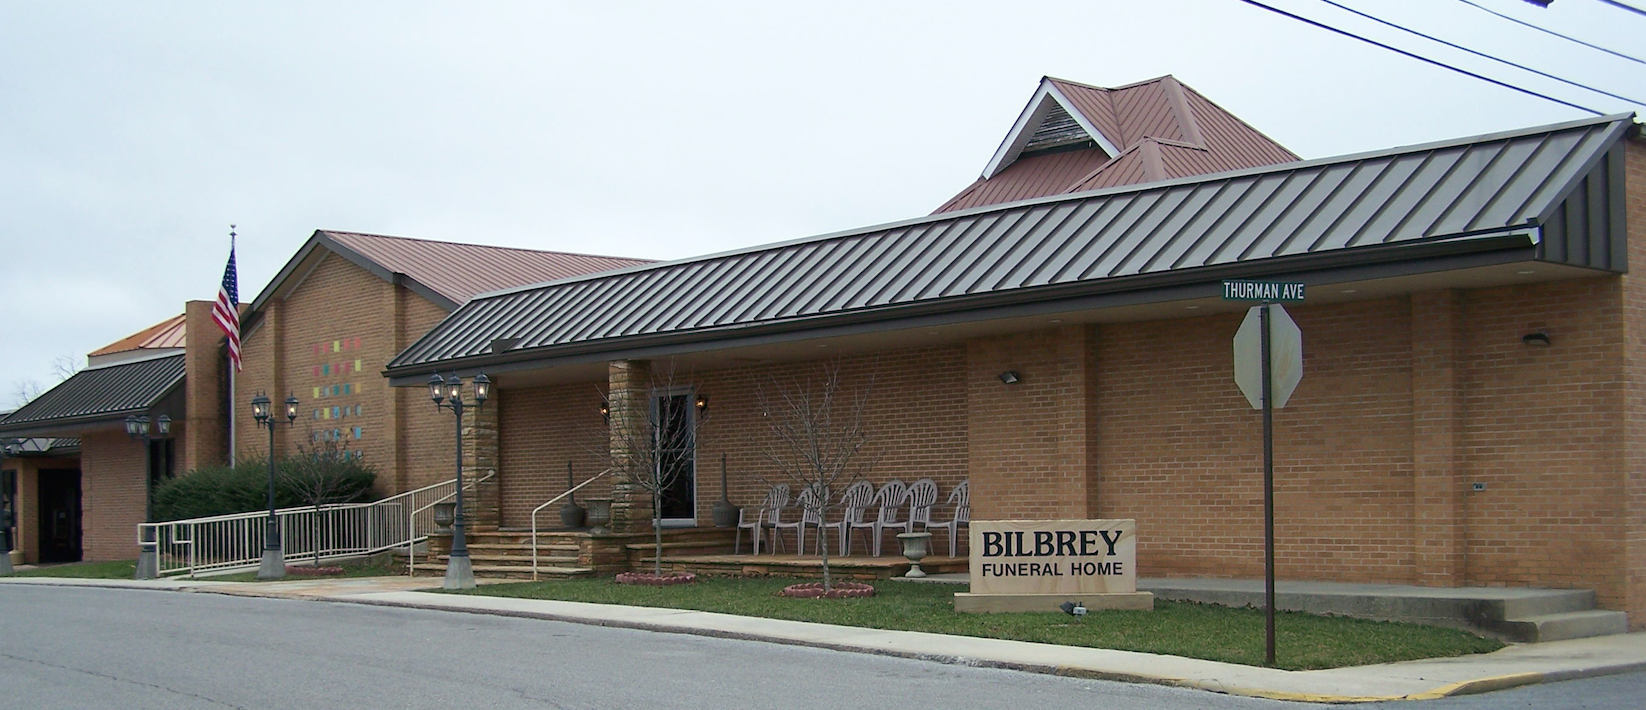 Plan Ahead With Bilbrey Funeral Home